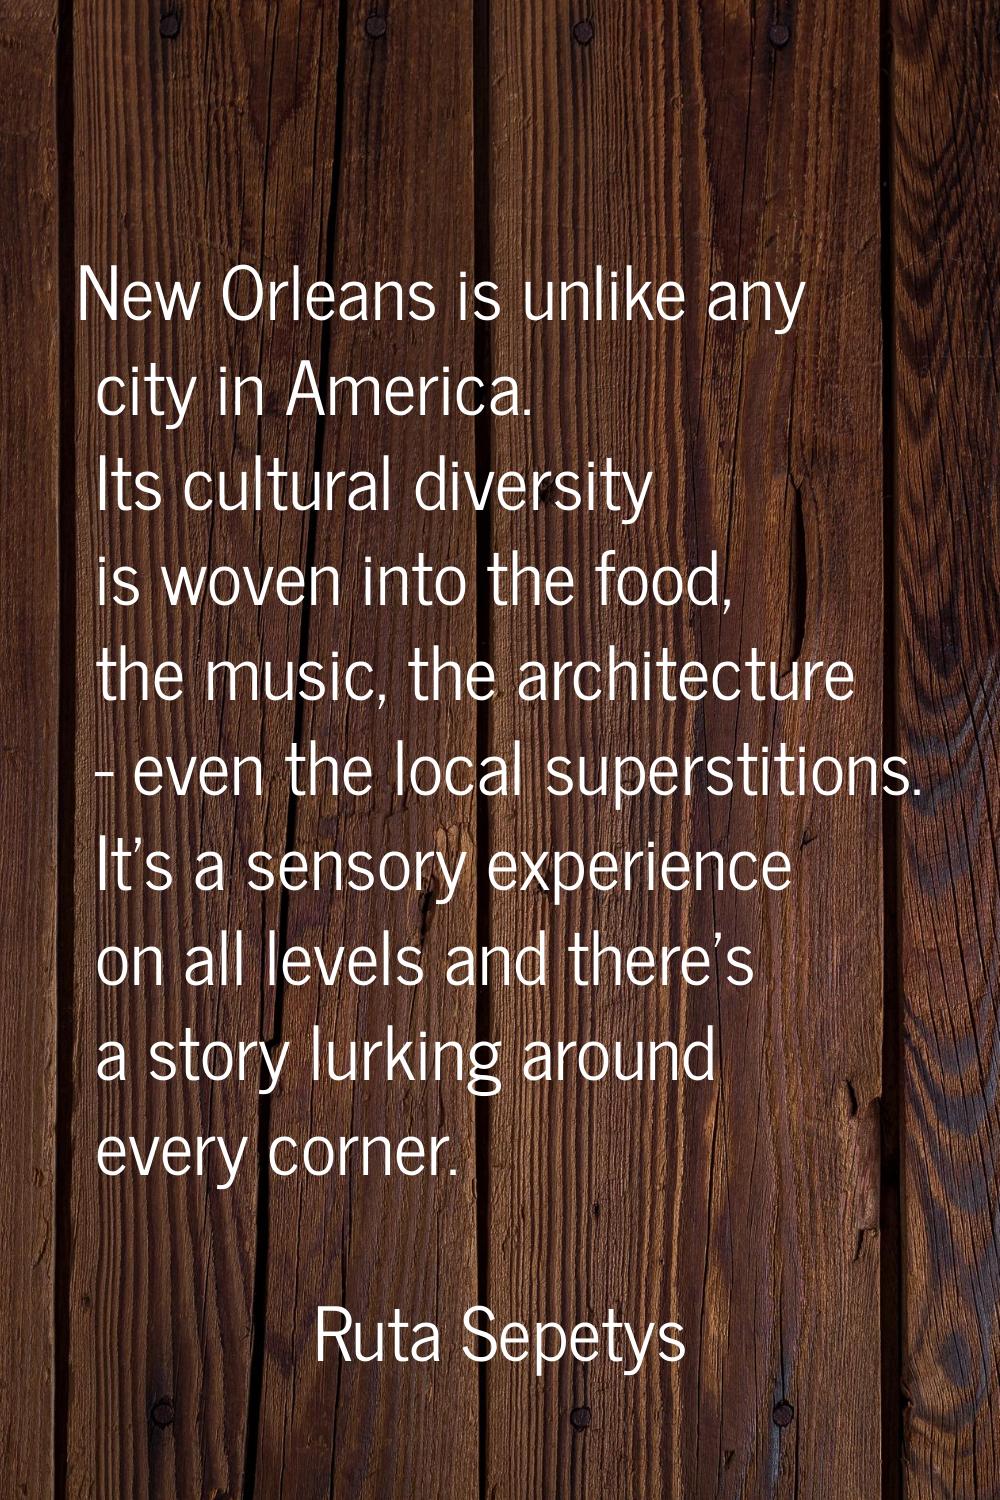 New Orleans is unlike any city in America. Its cultural diversity is woven into the food, the music